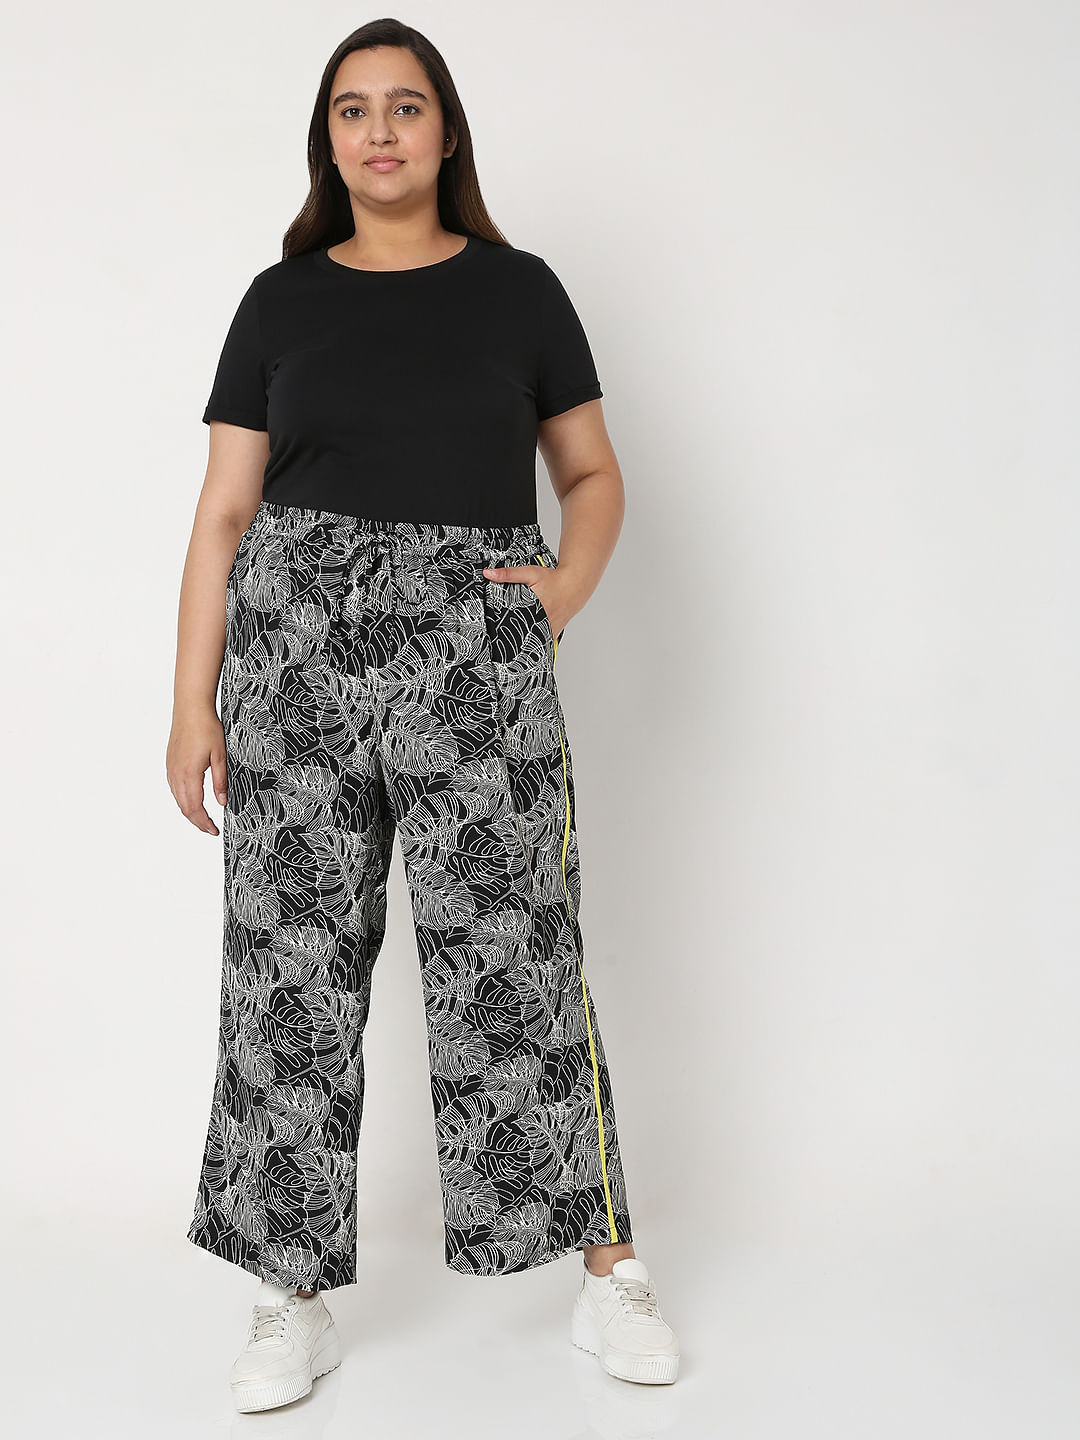 Buy BLACK PLAID PANTS for Women Online in India